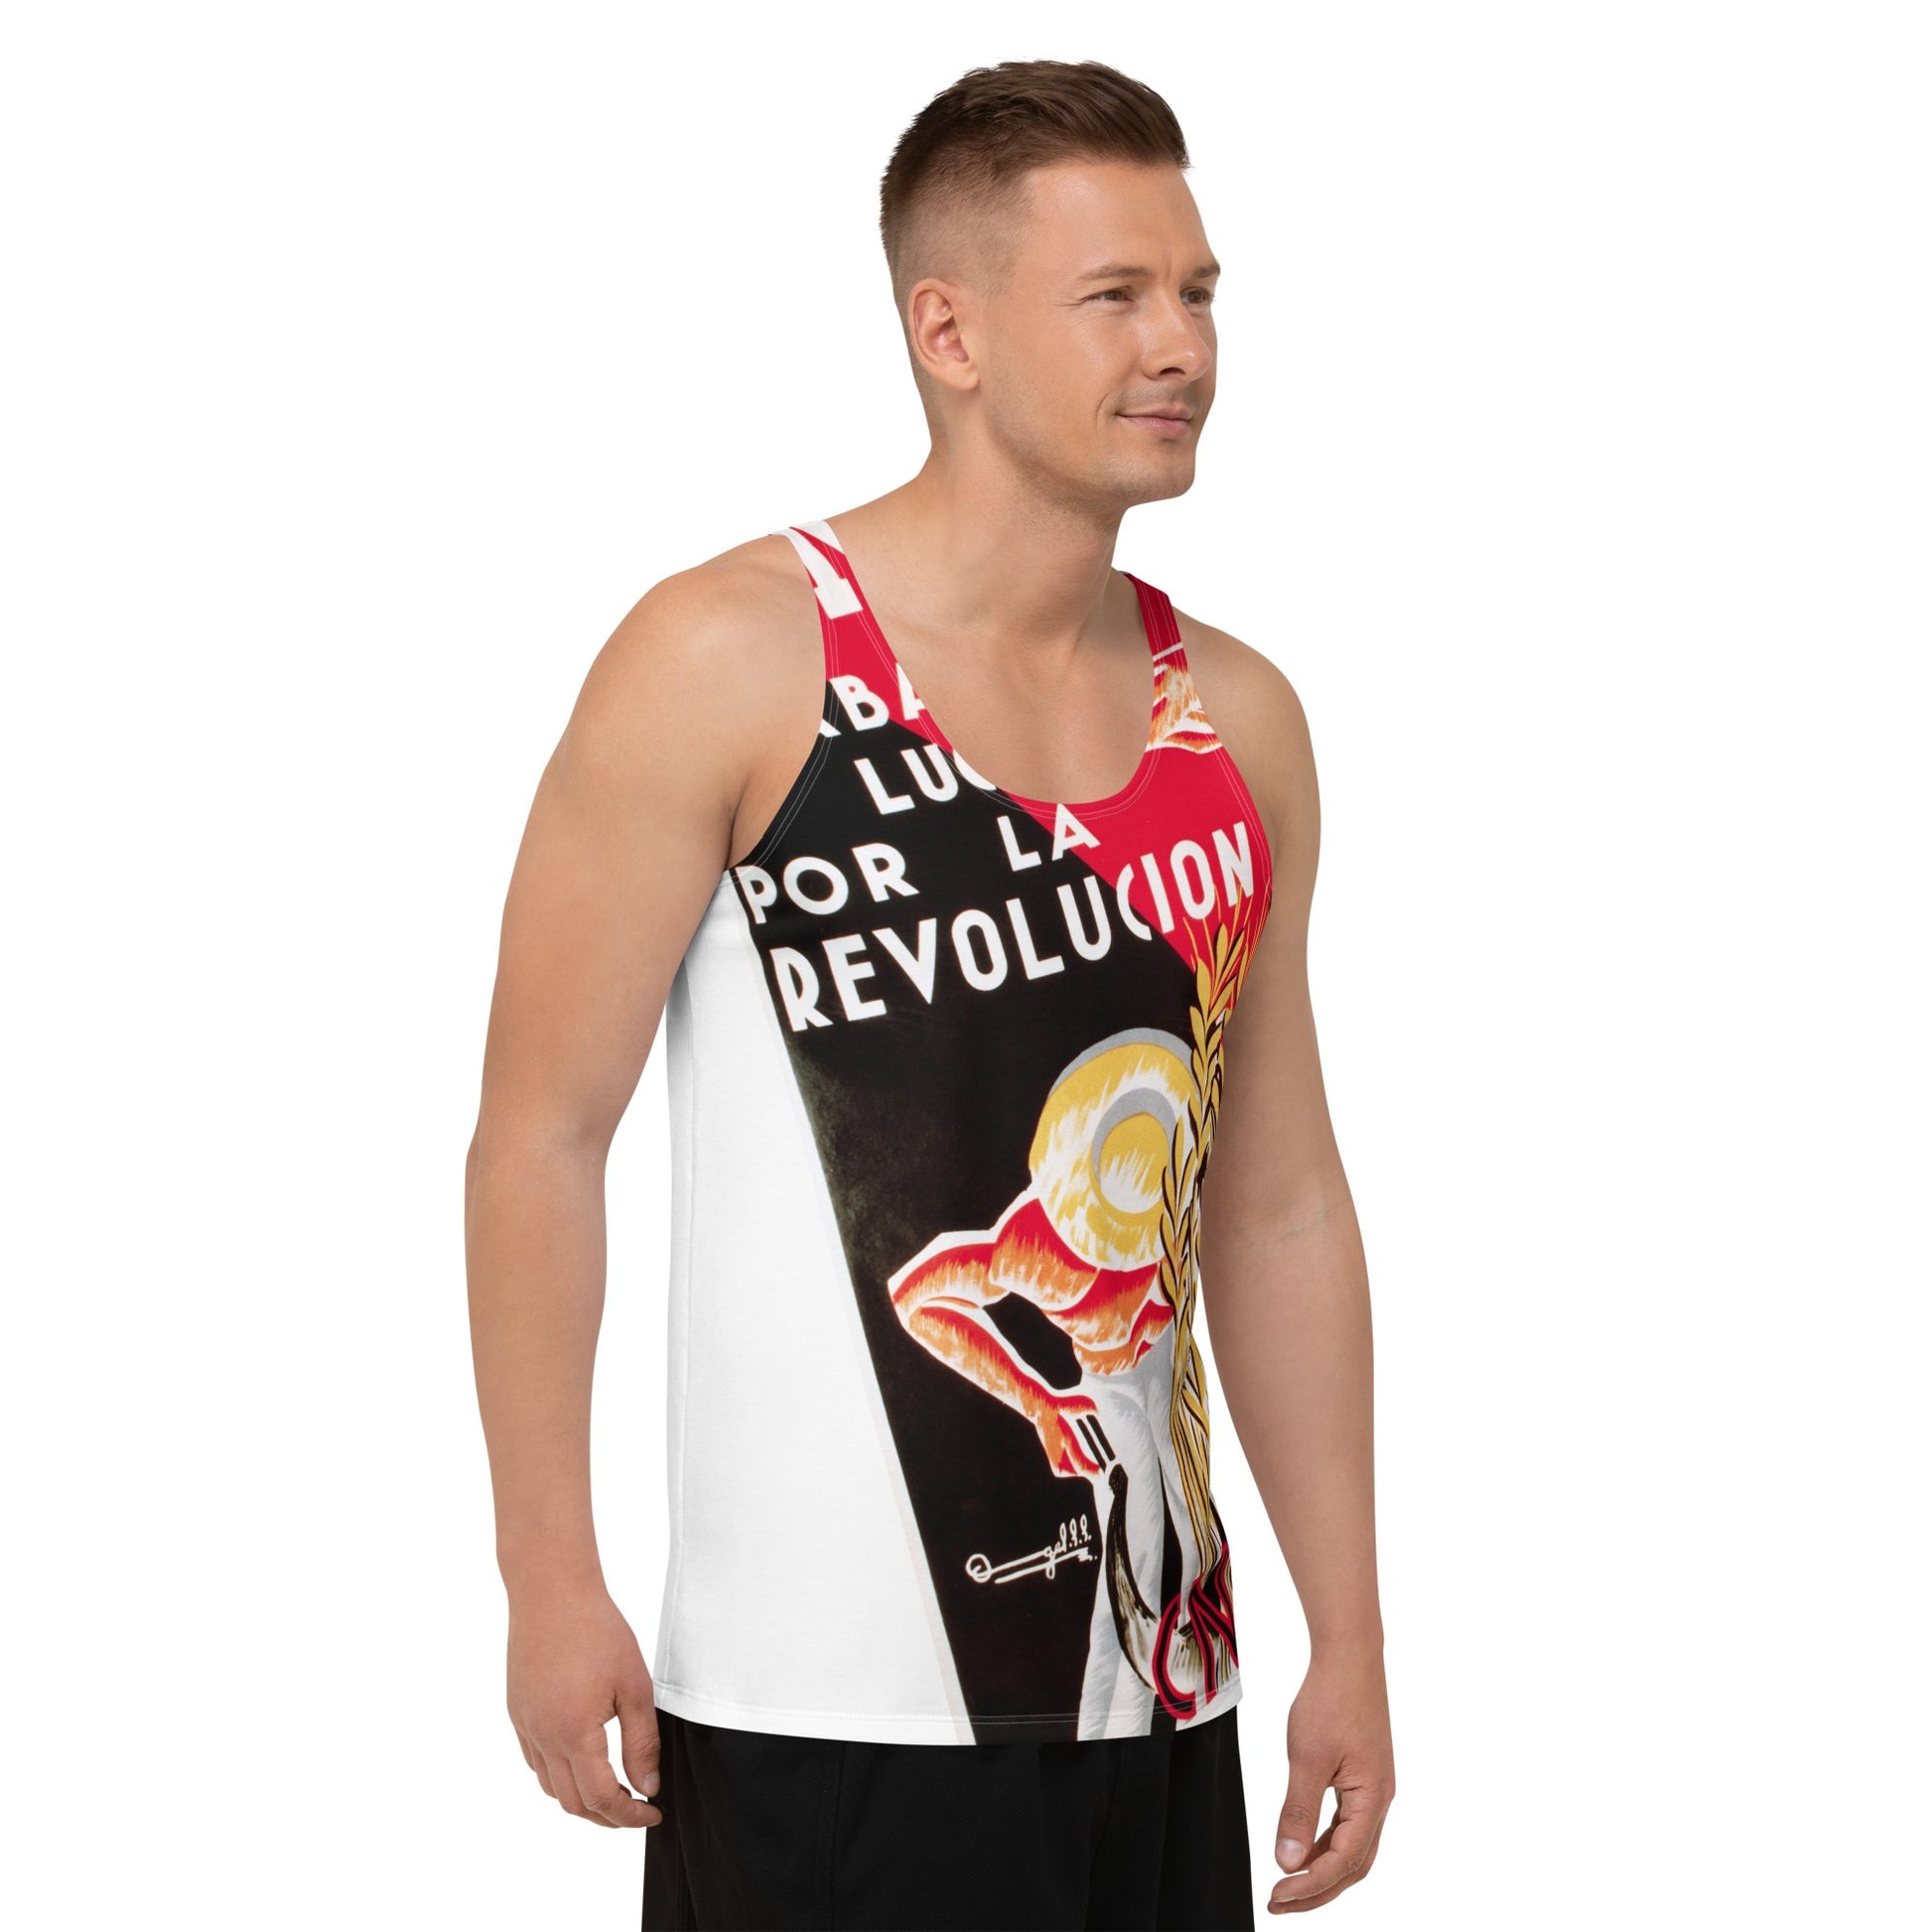 Camarada - All-Over Print Men's Tank Top - Souled Out World